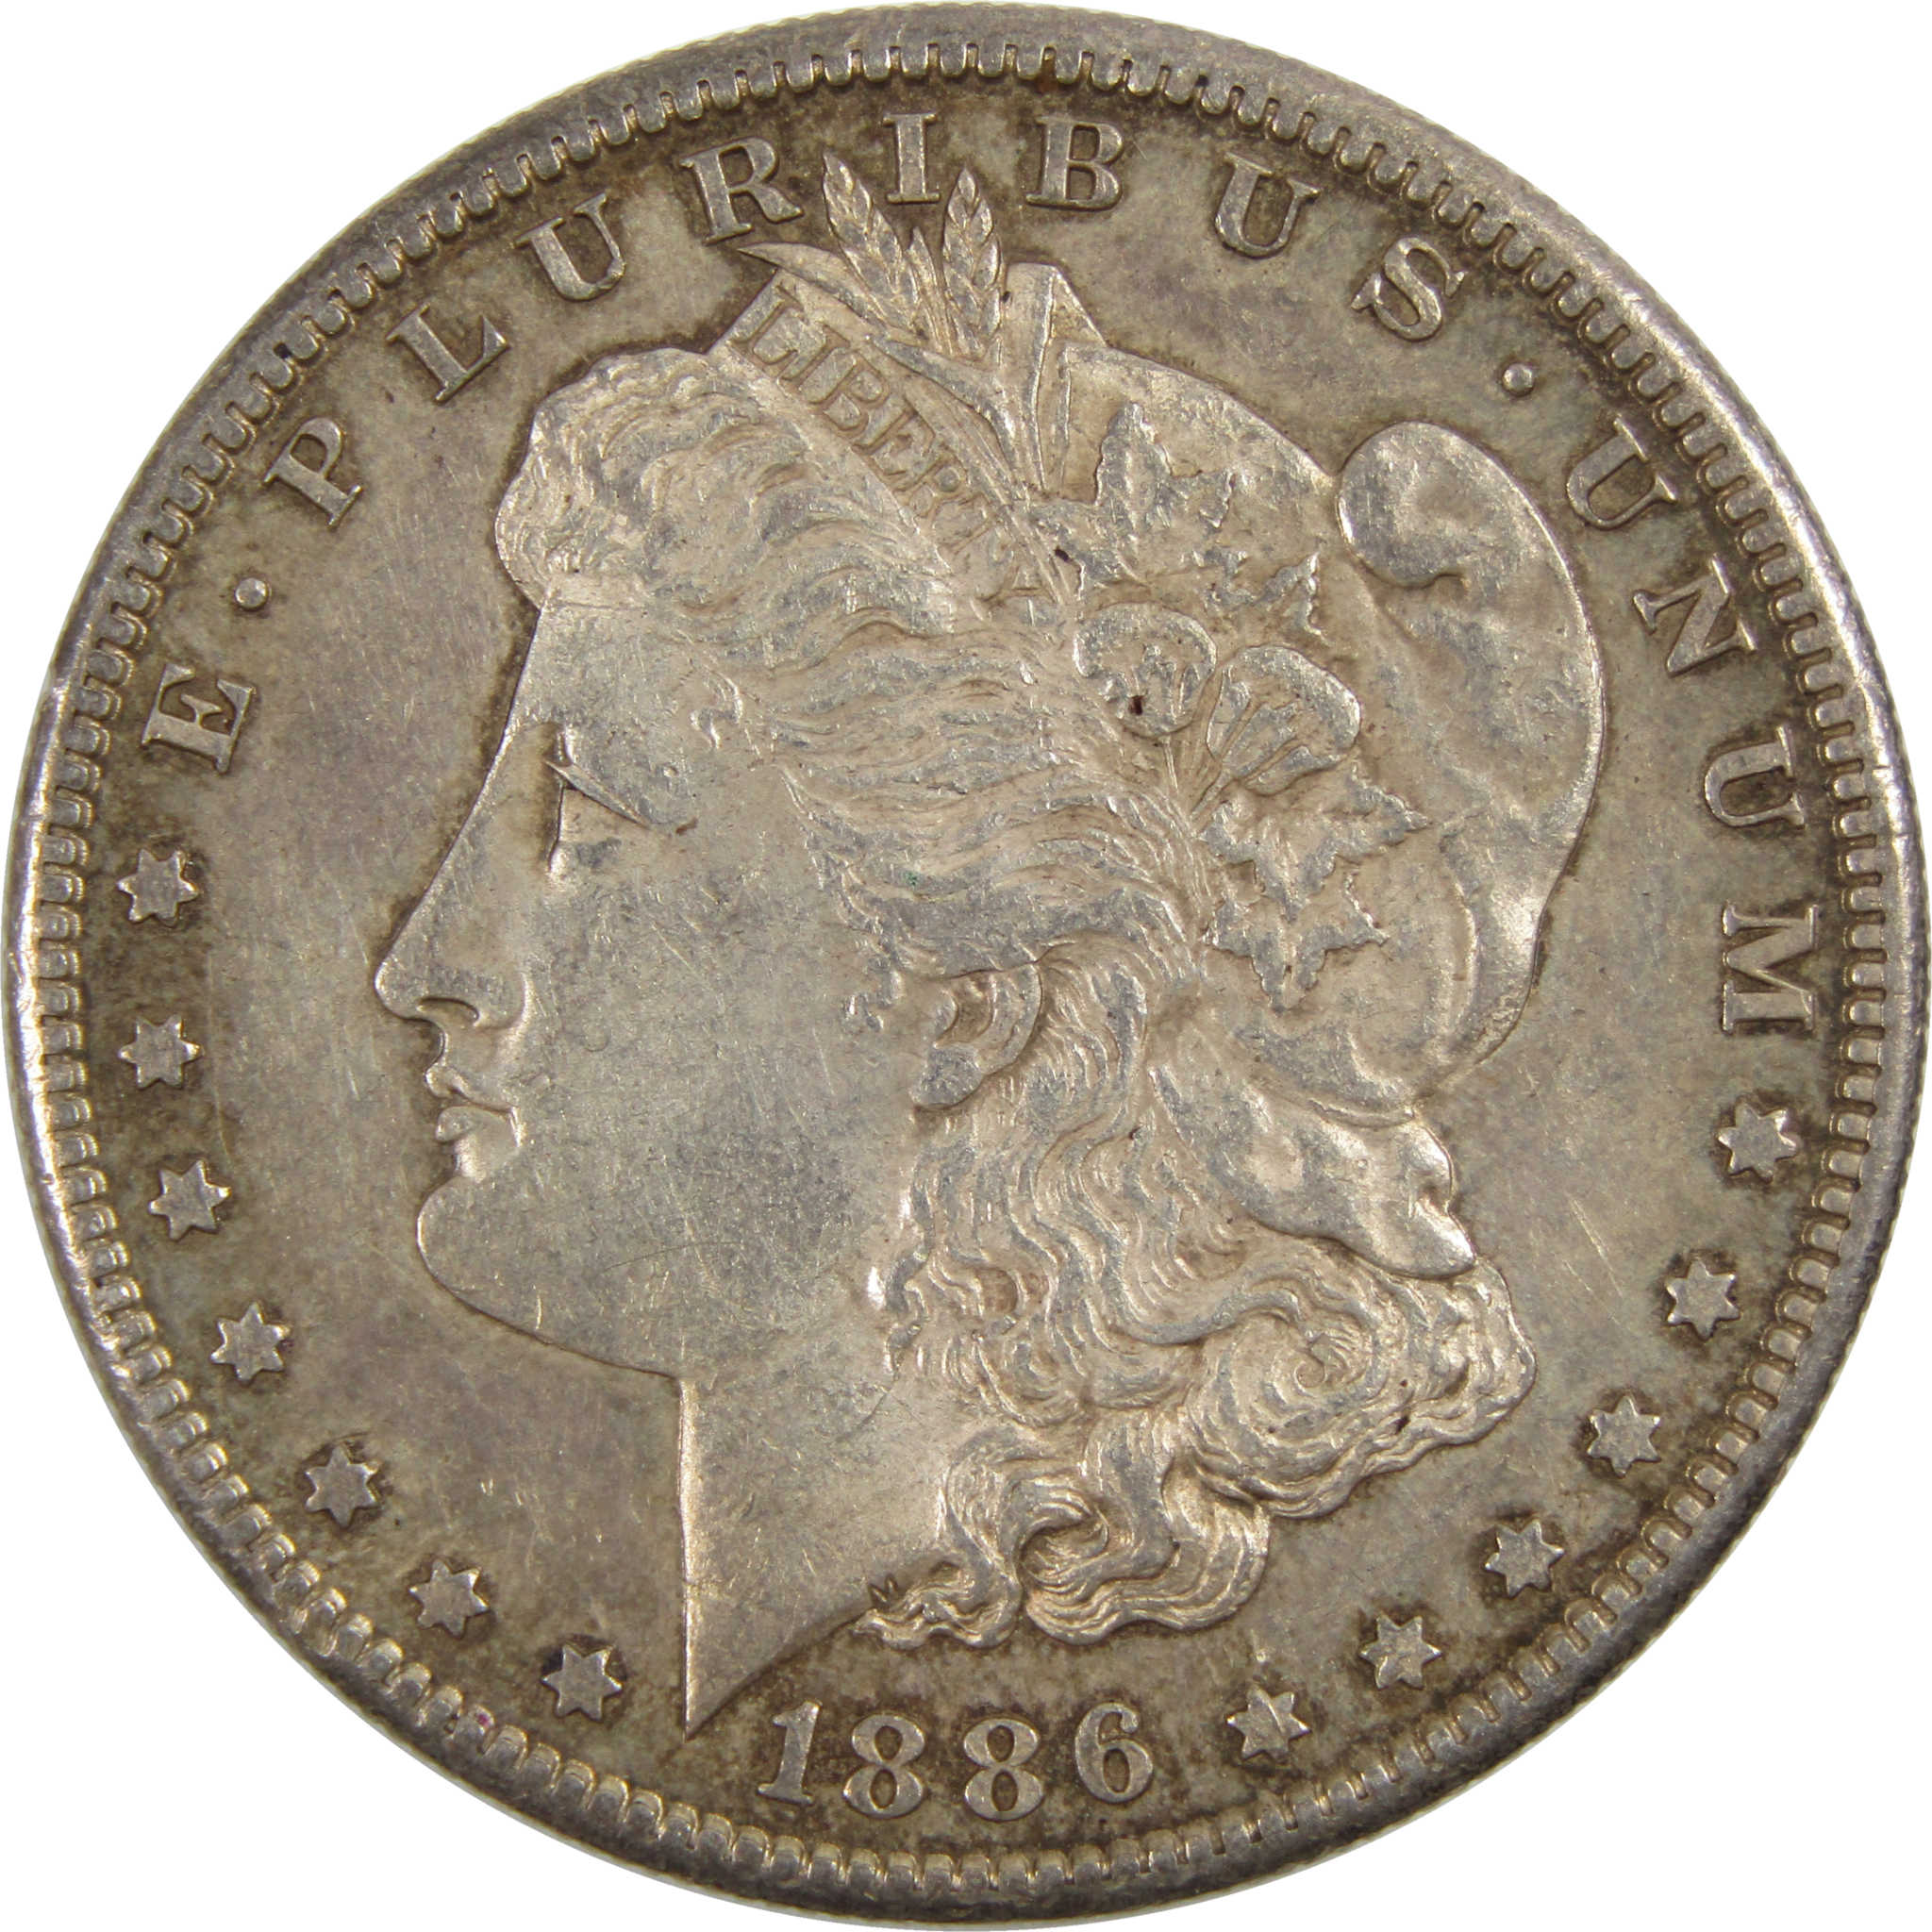 1886 S Morgan Dollar AU About Uncirculated 90% Silver $1 Coin SKU:I8125 - Morgan coin - Morgan silver dollar - Morgan silver dollar for sale - Profile Coins &amp; Collectibles